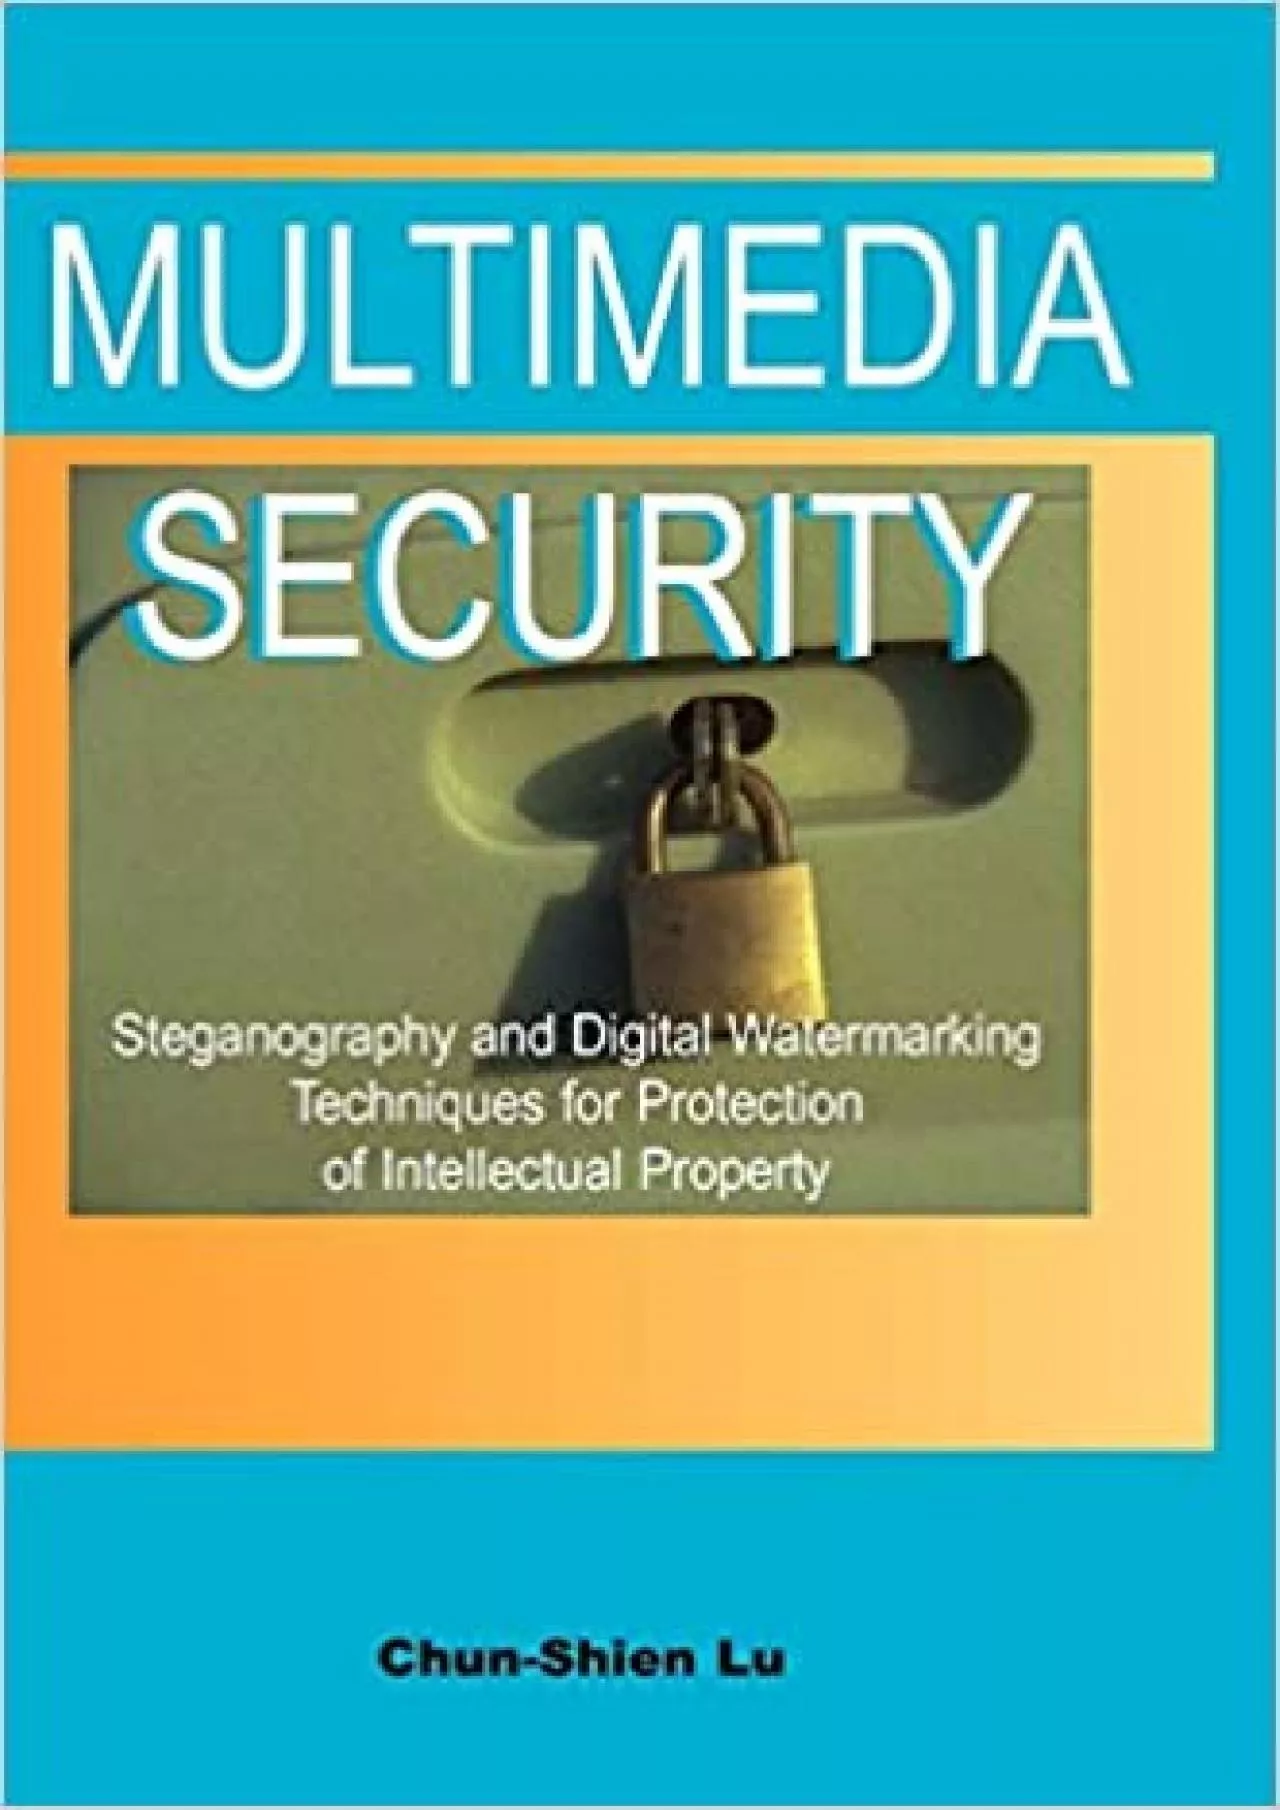 (BOOK)-Multimedia Security Steganography and Digital Watermarking Techniques for Protection